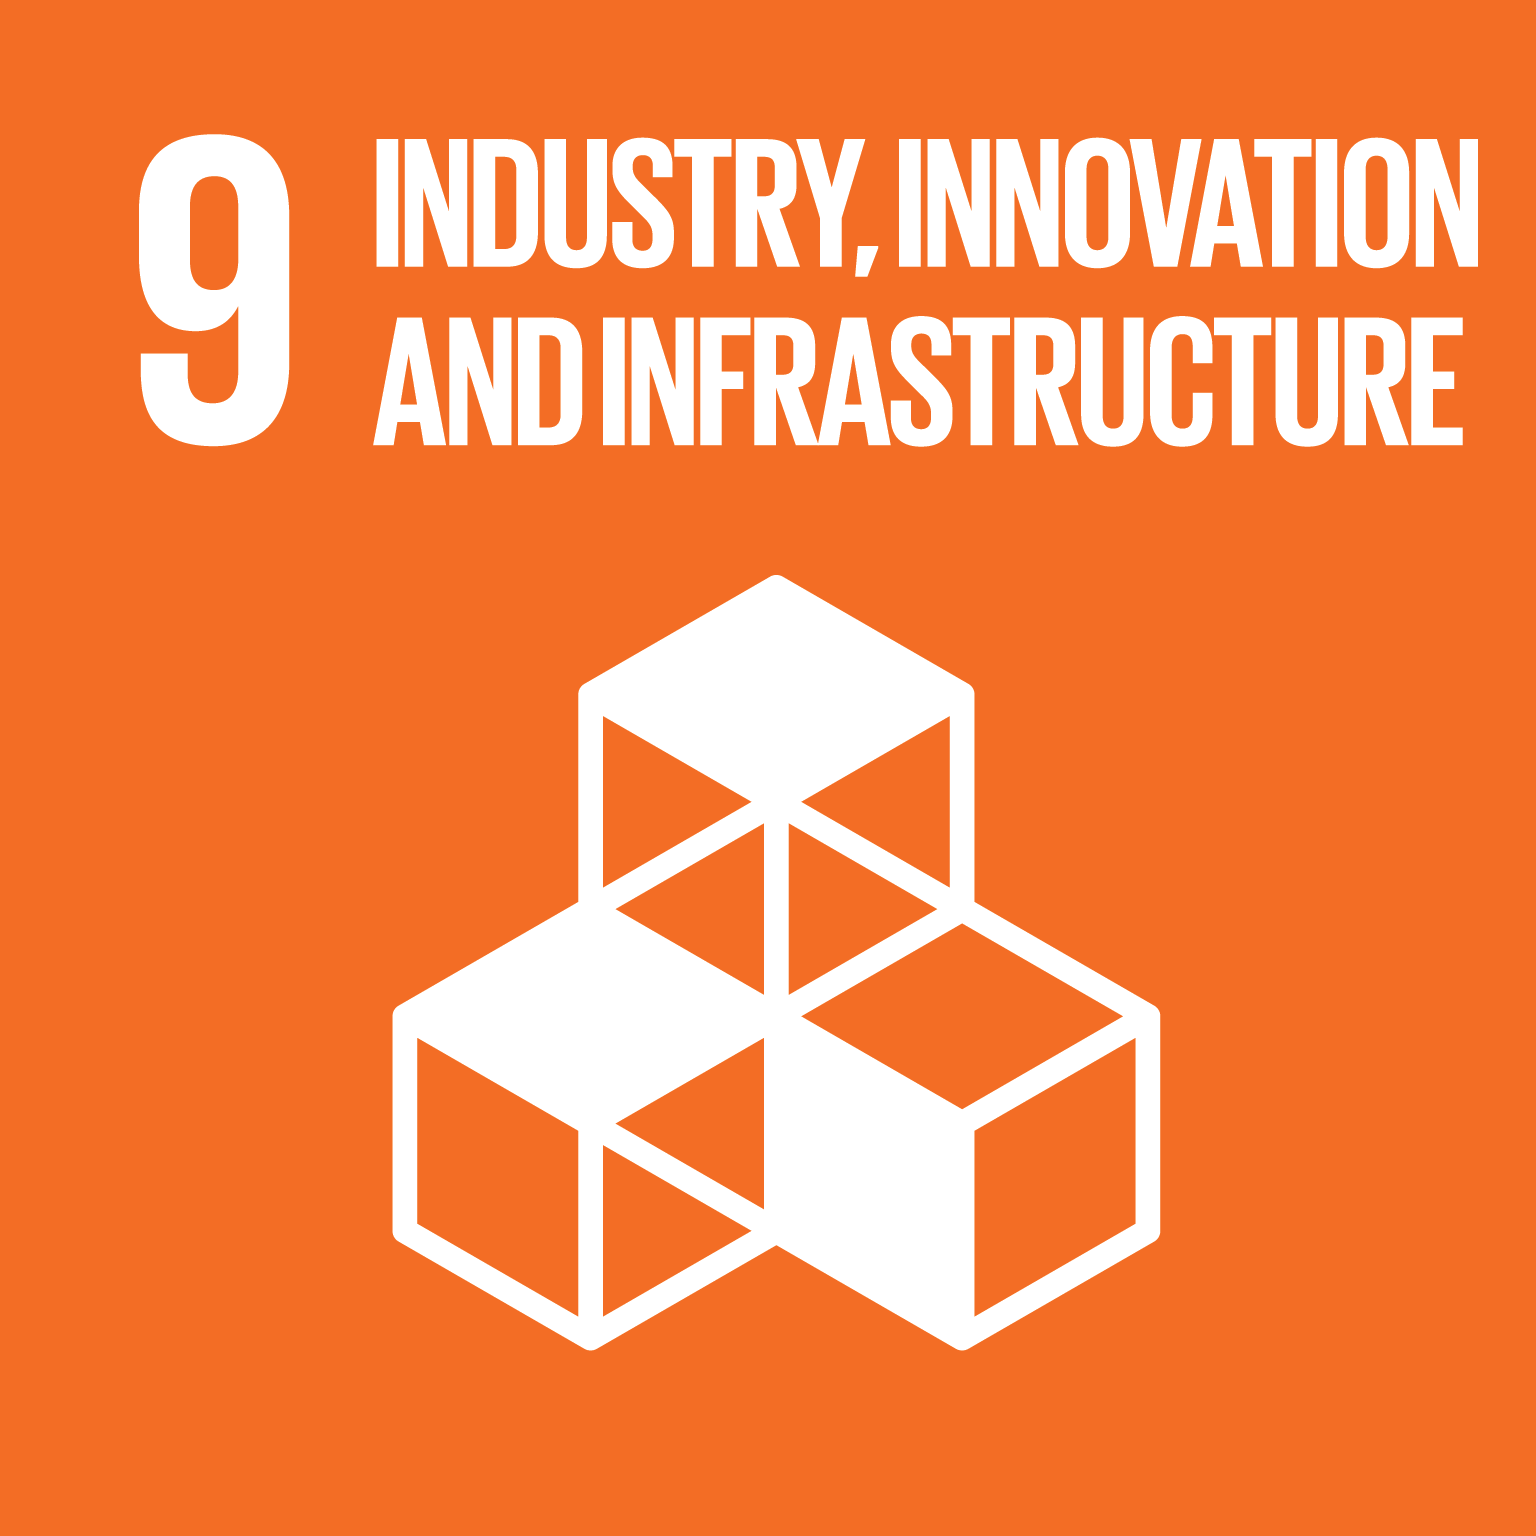 sustainable development goal 9 icon industry, innovation and infrastructure